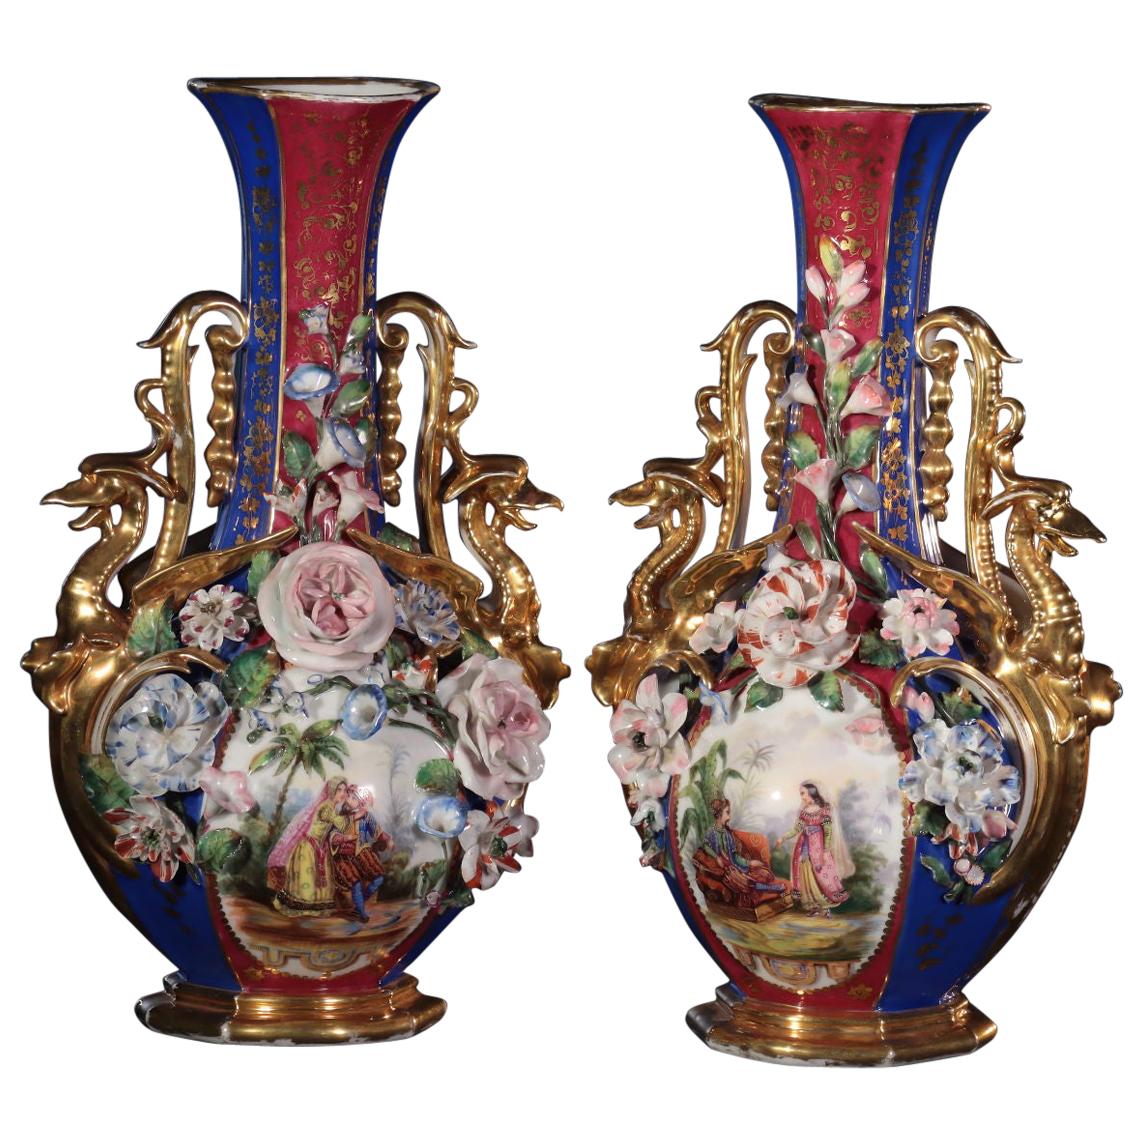 Pair of Vases with Oriental Figures, Attributed to Jacob Petit